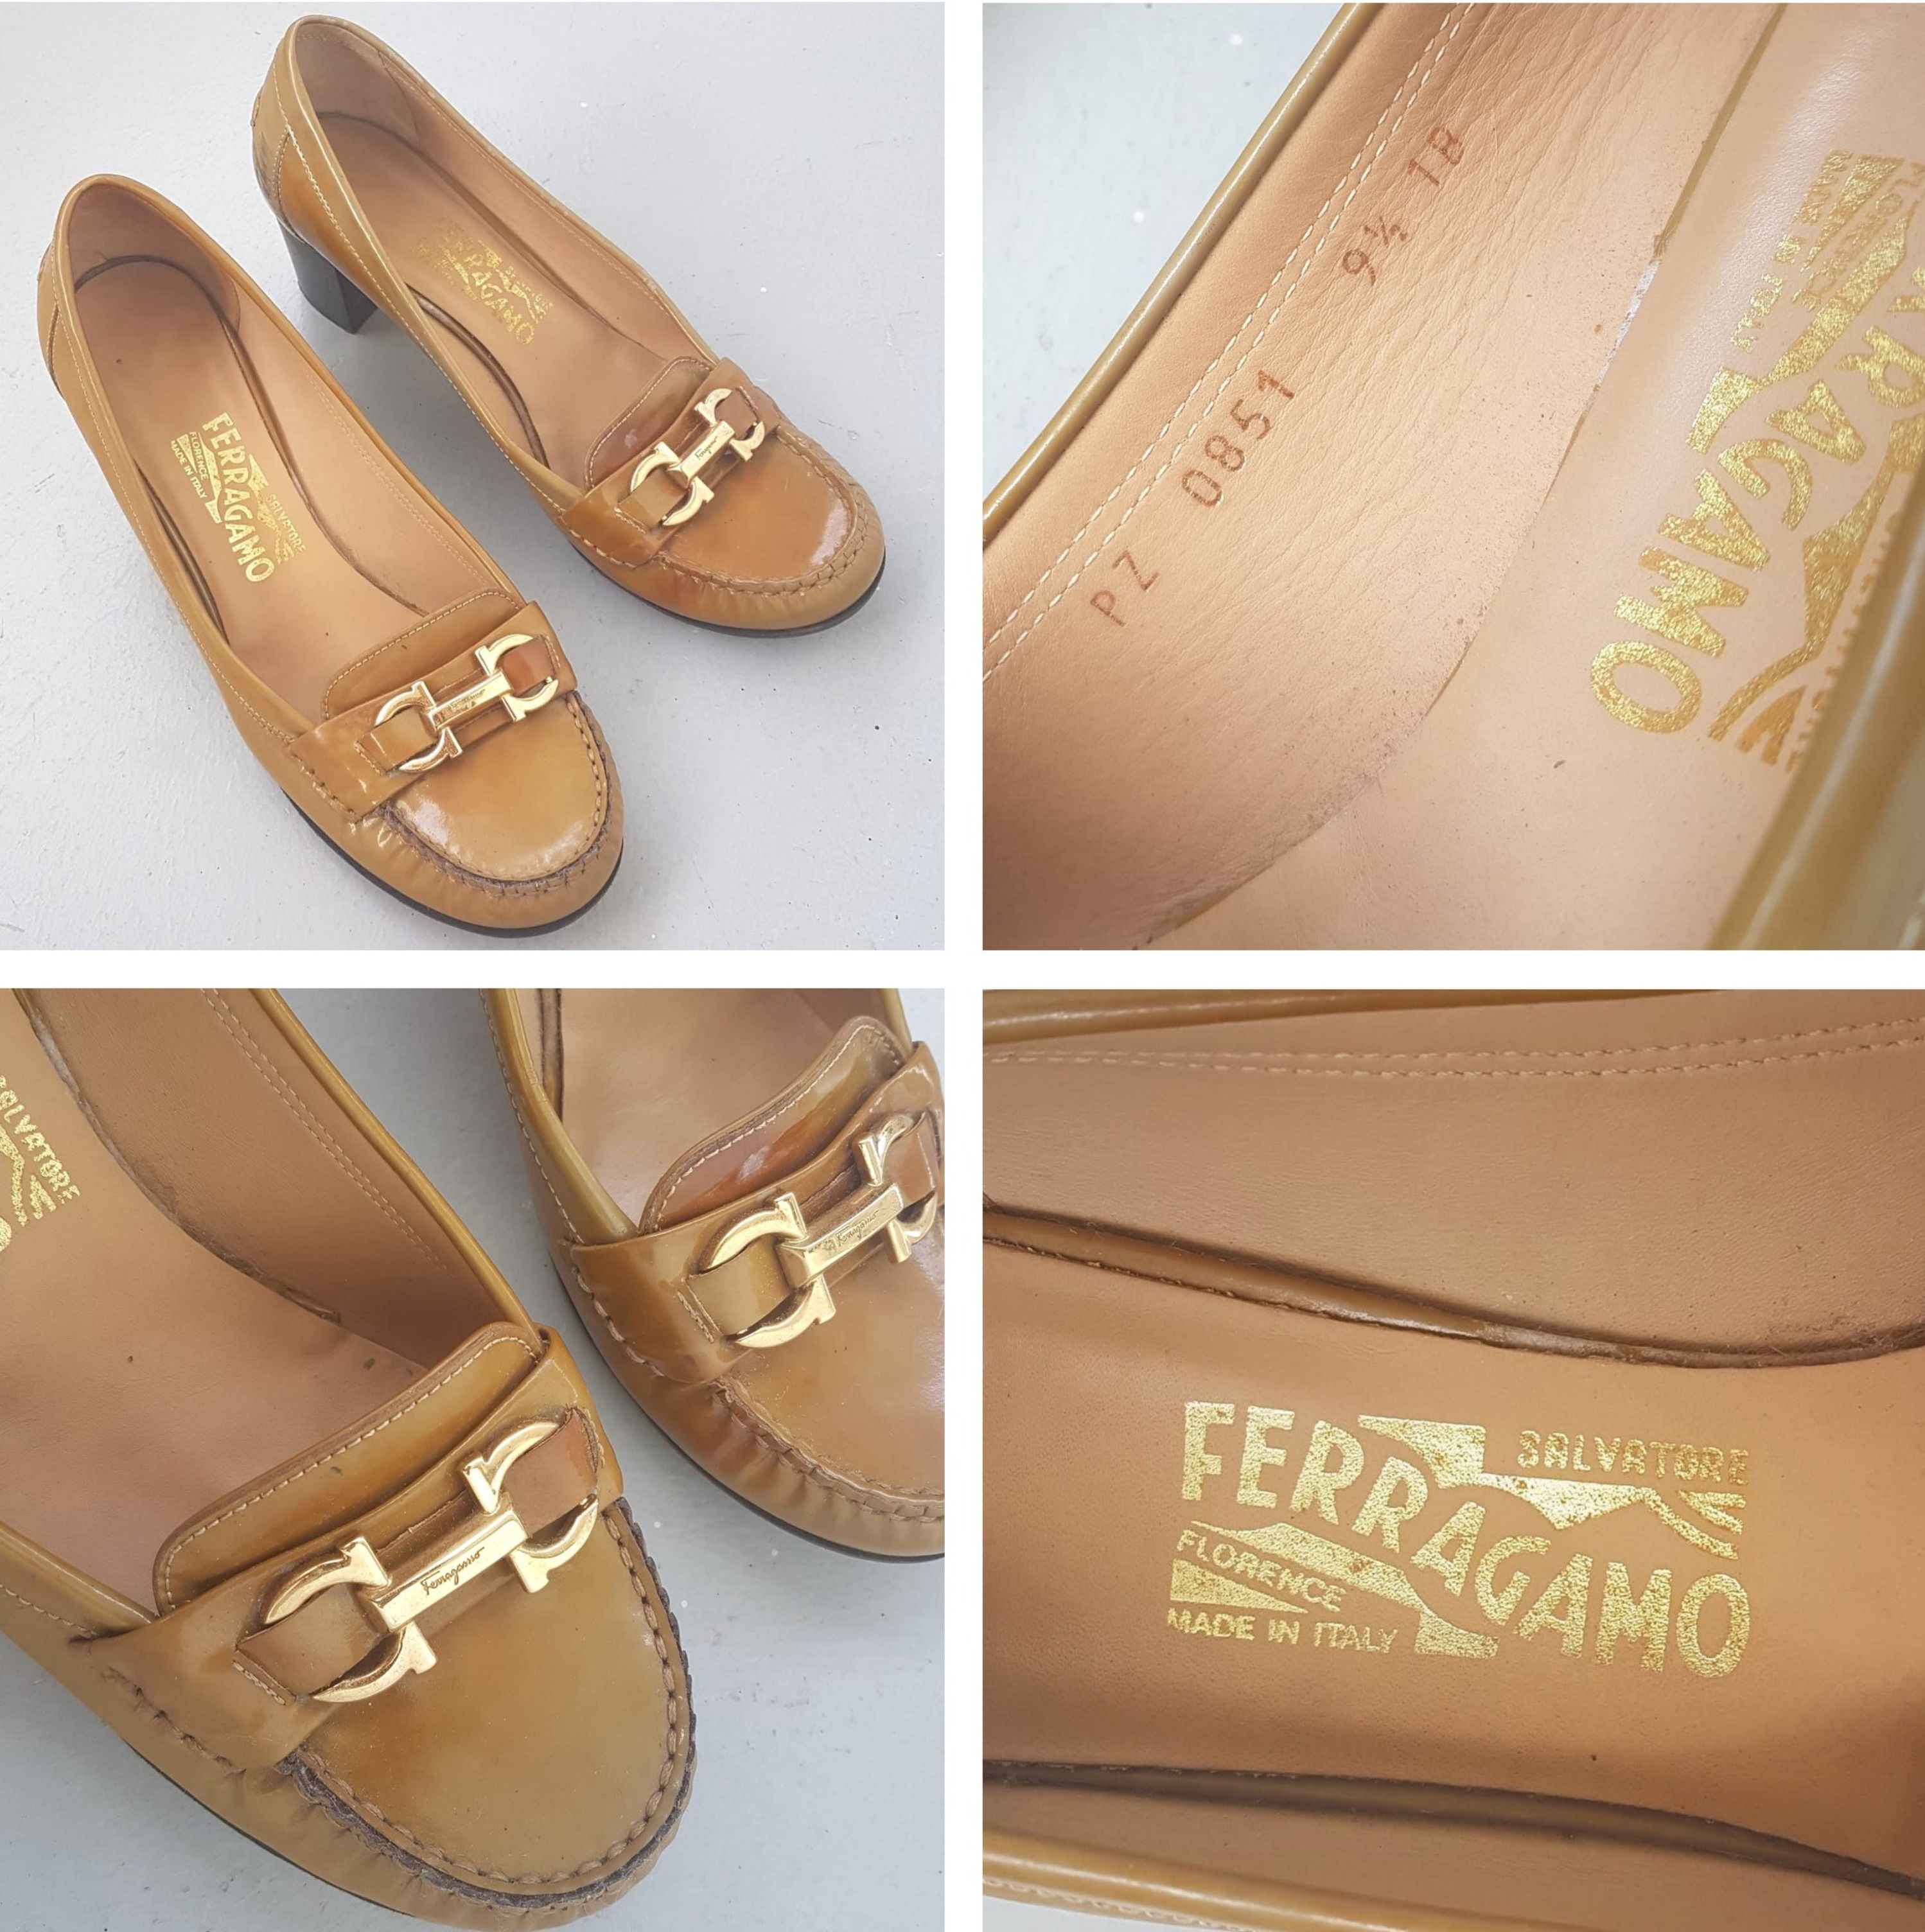 Salvatore Ferragamo Designer Shoes, Brown Tan Leather Heel, Size 9.5, Pumps  Model, Gancini Buckle Loafers, Made in ITALY, Timeless Classic, Luxury